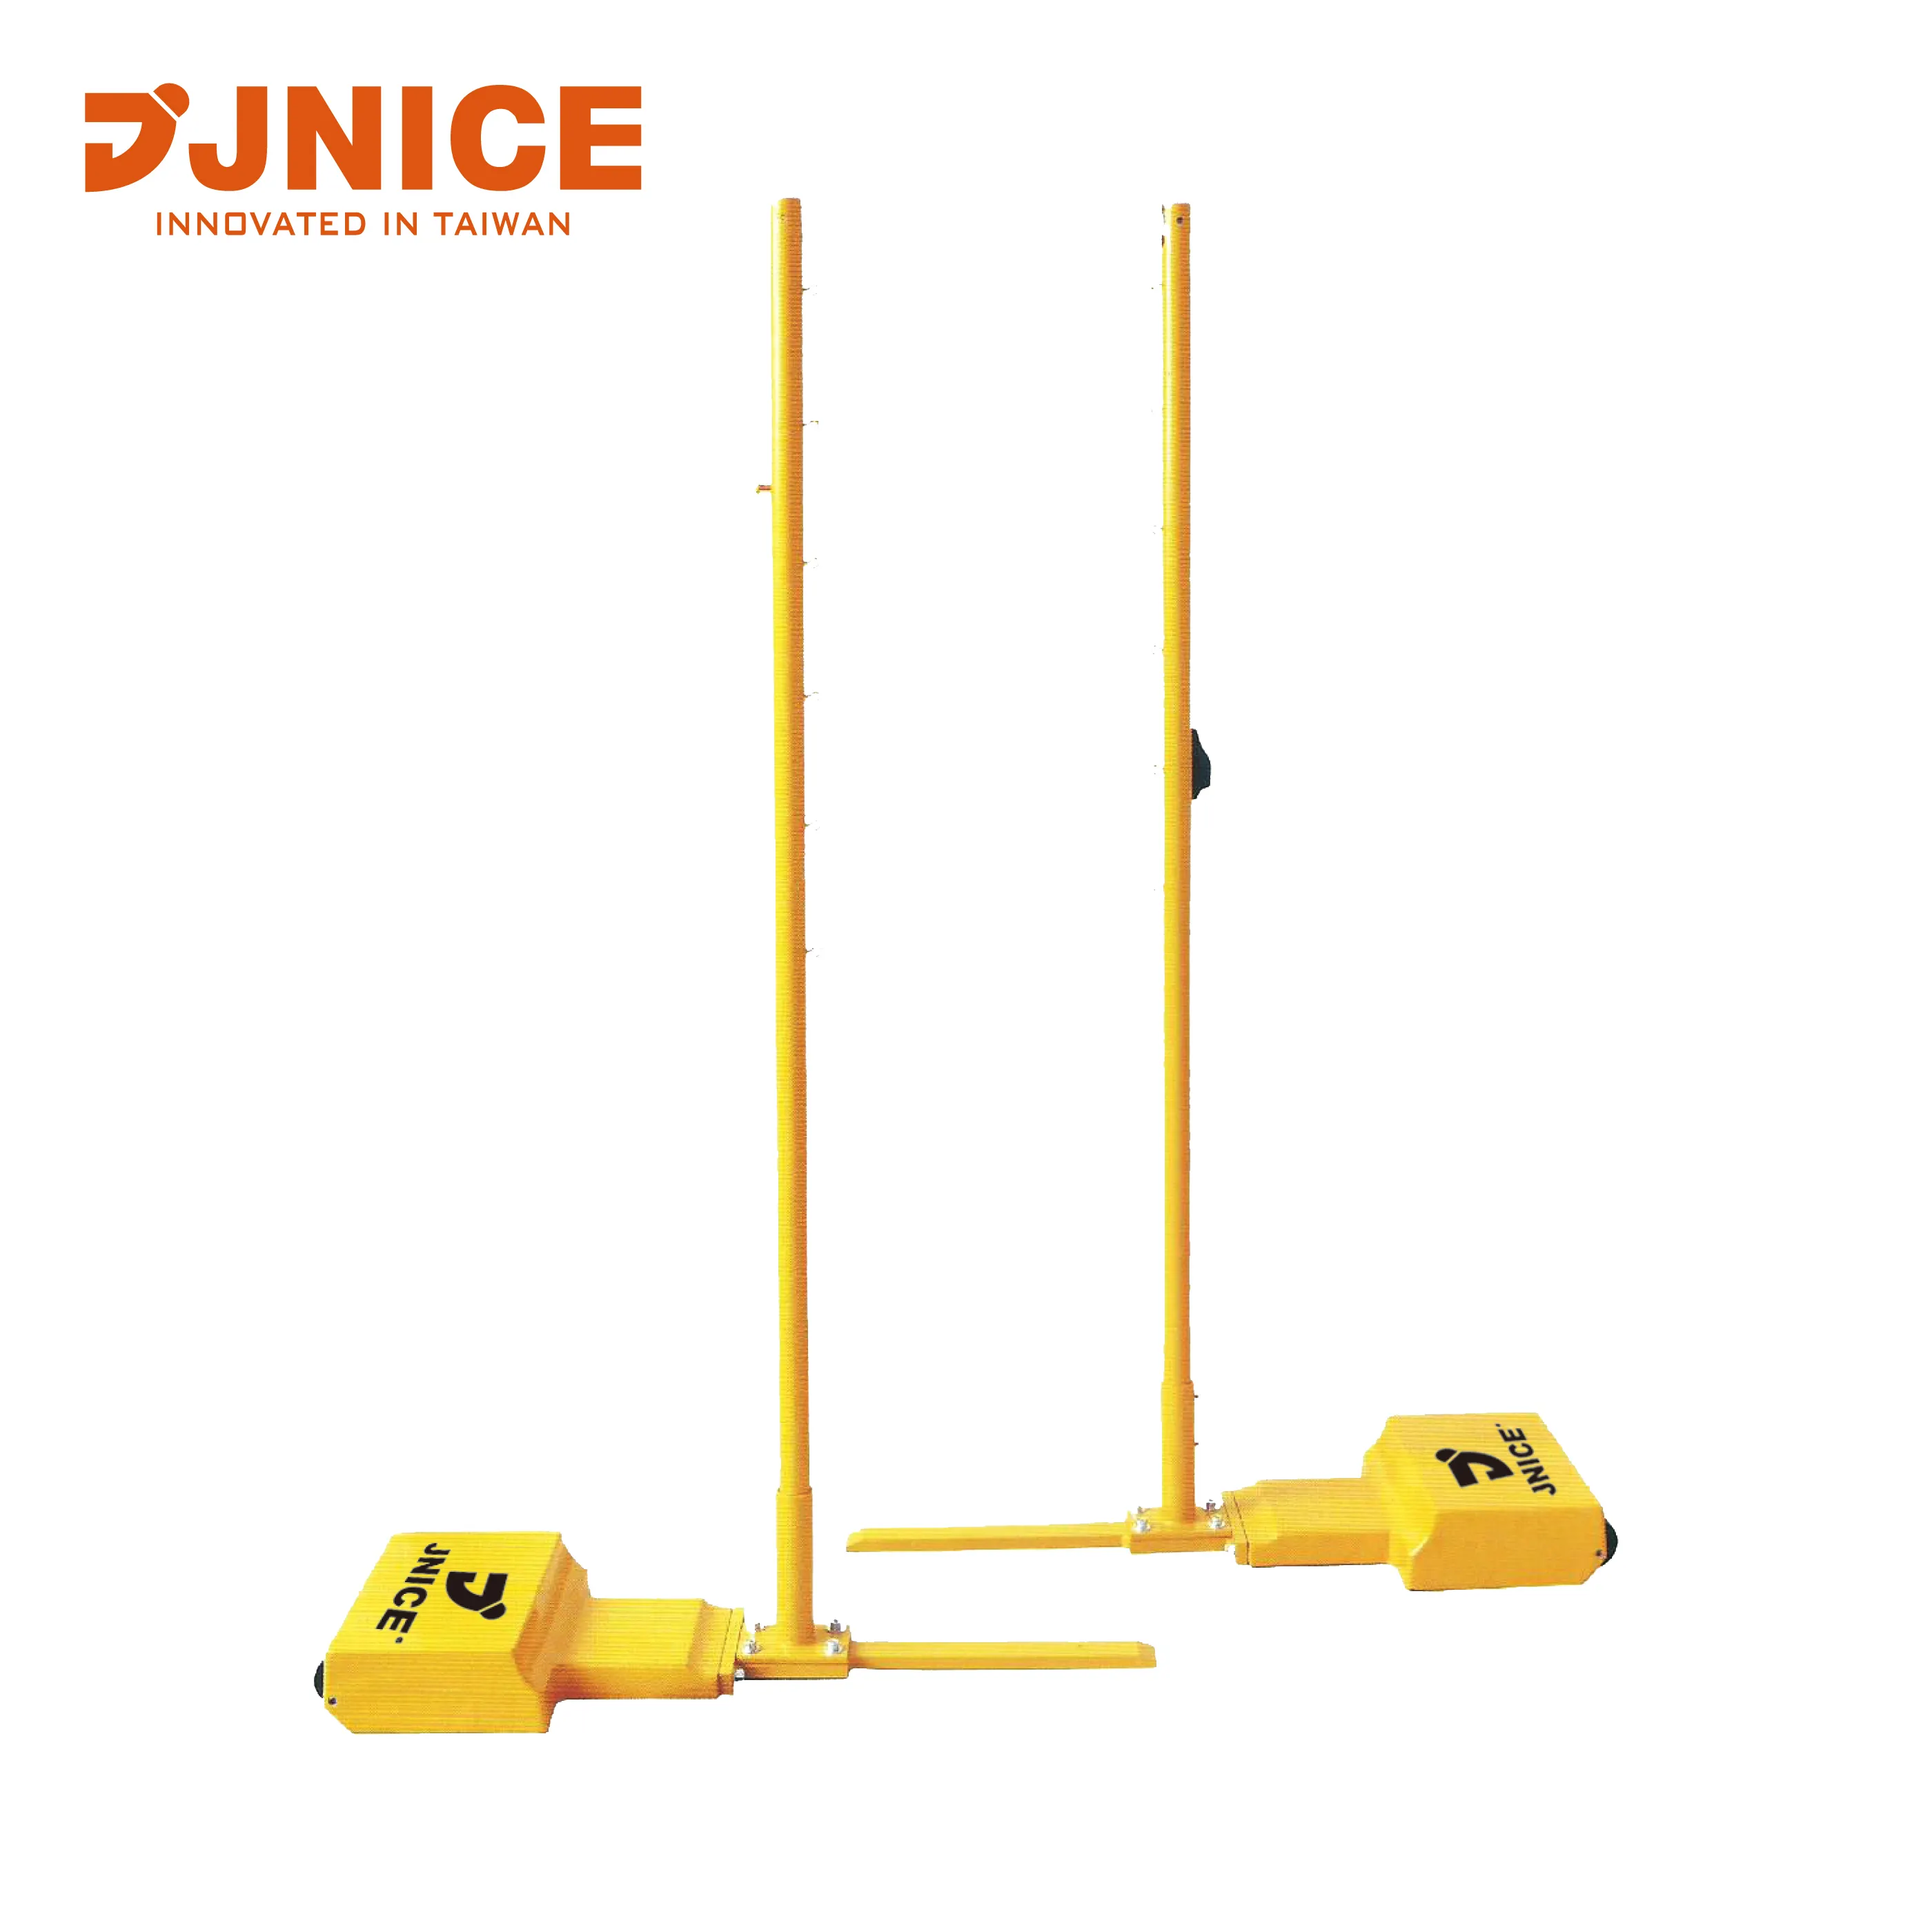 Source JNICE badminton net pole price for normal use on m.alibaba